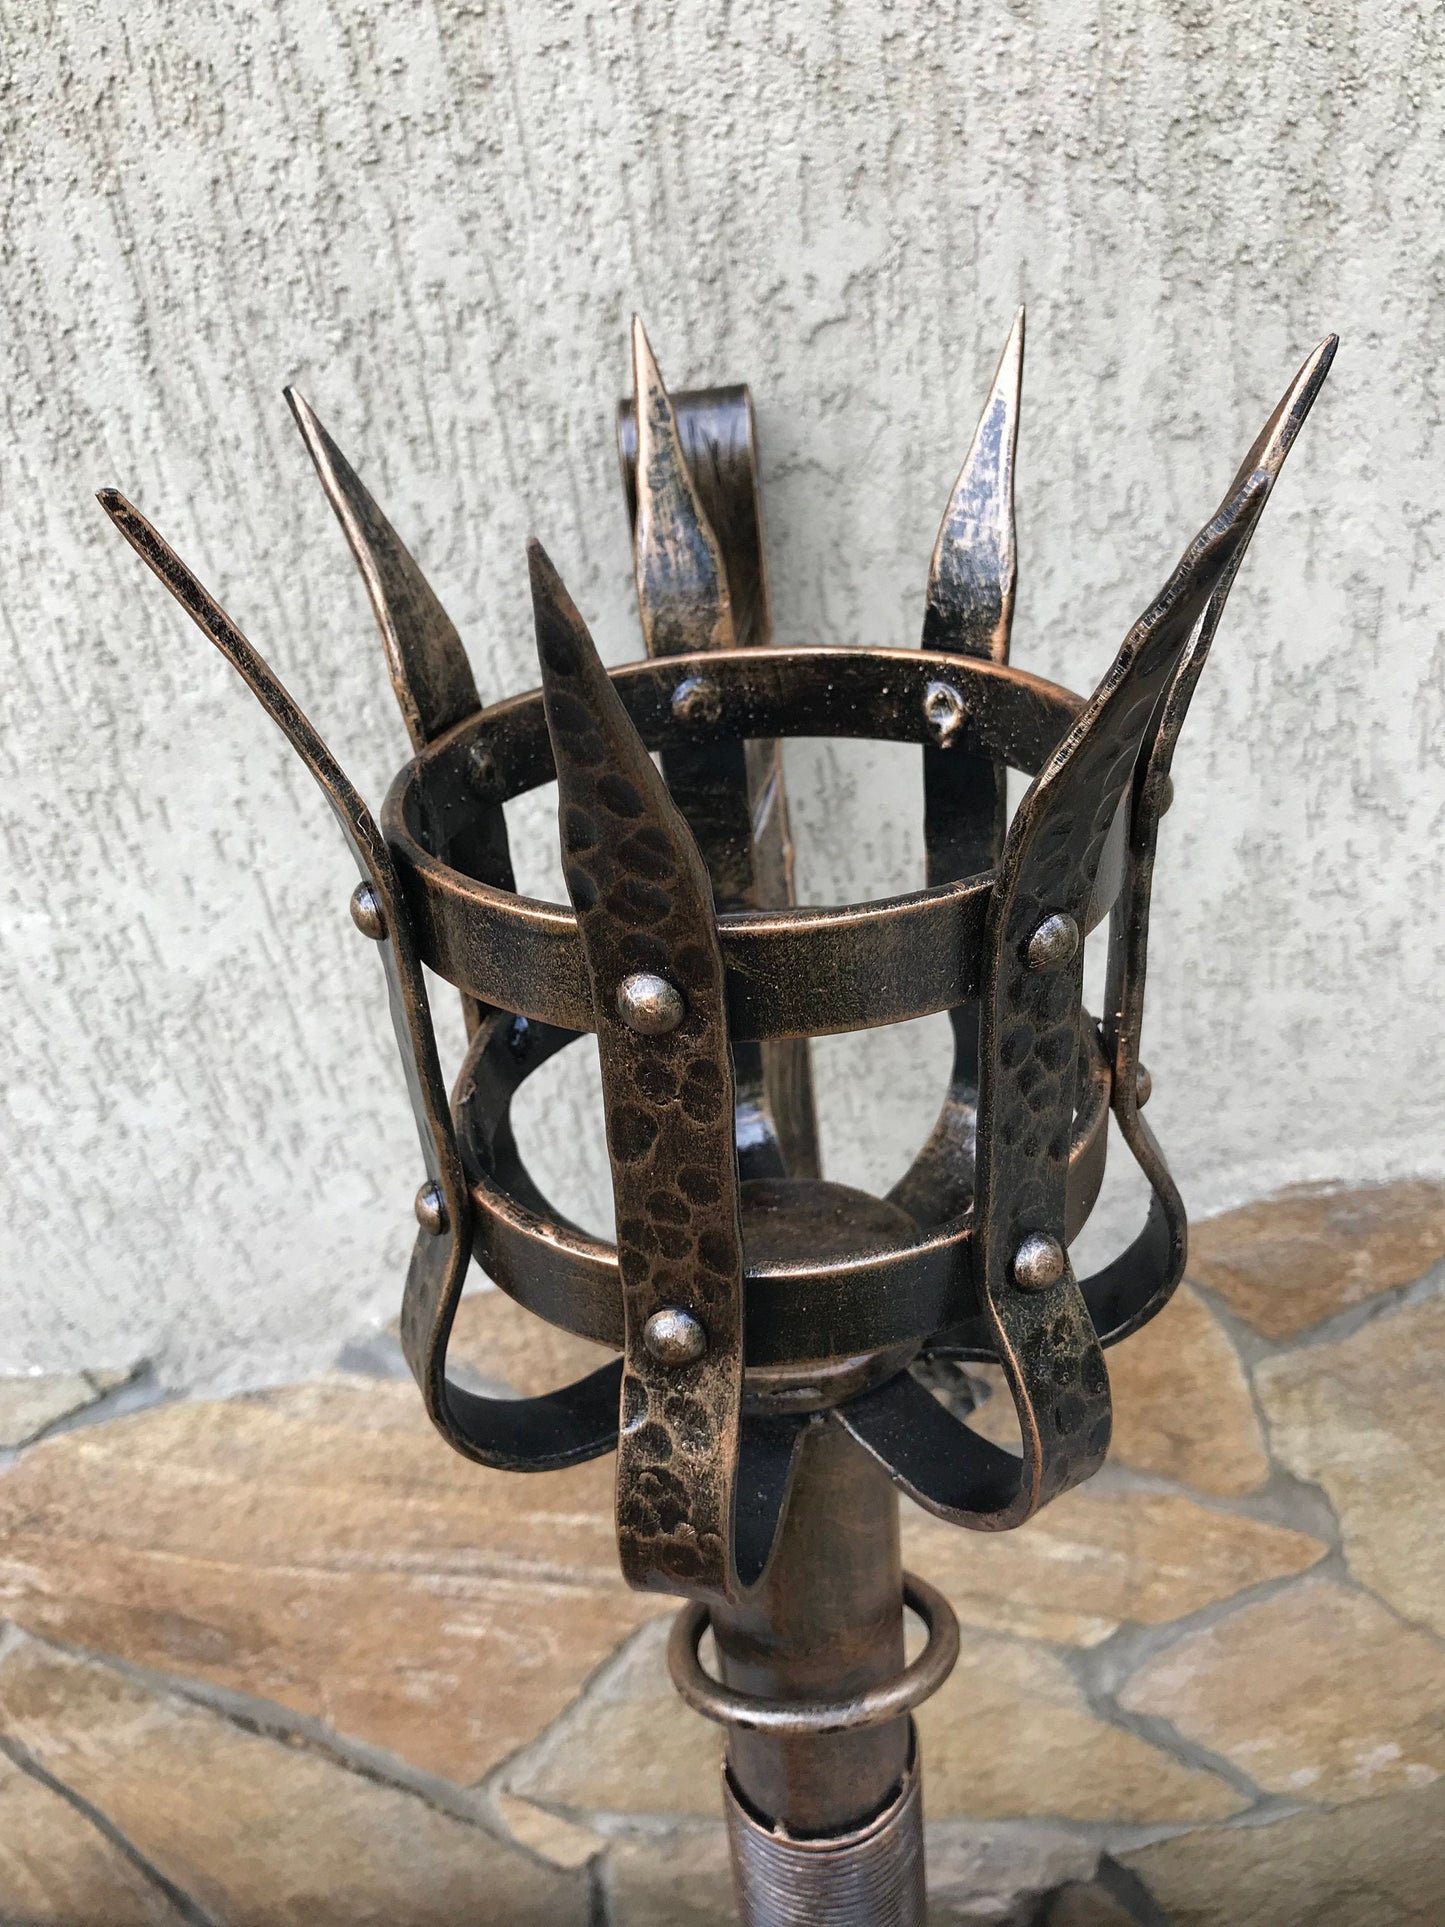 Candle holder, torch, metal candle holder, candle stick, sconce candle holder, wall sconce, candlestick holder, candle stand, iron gift